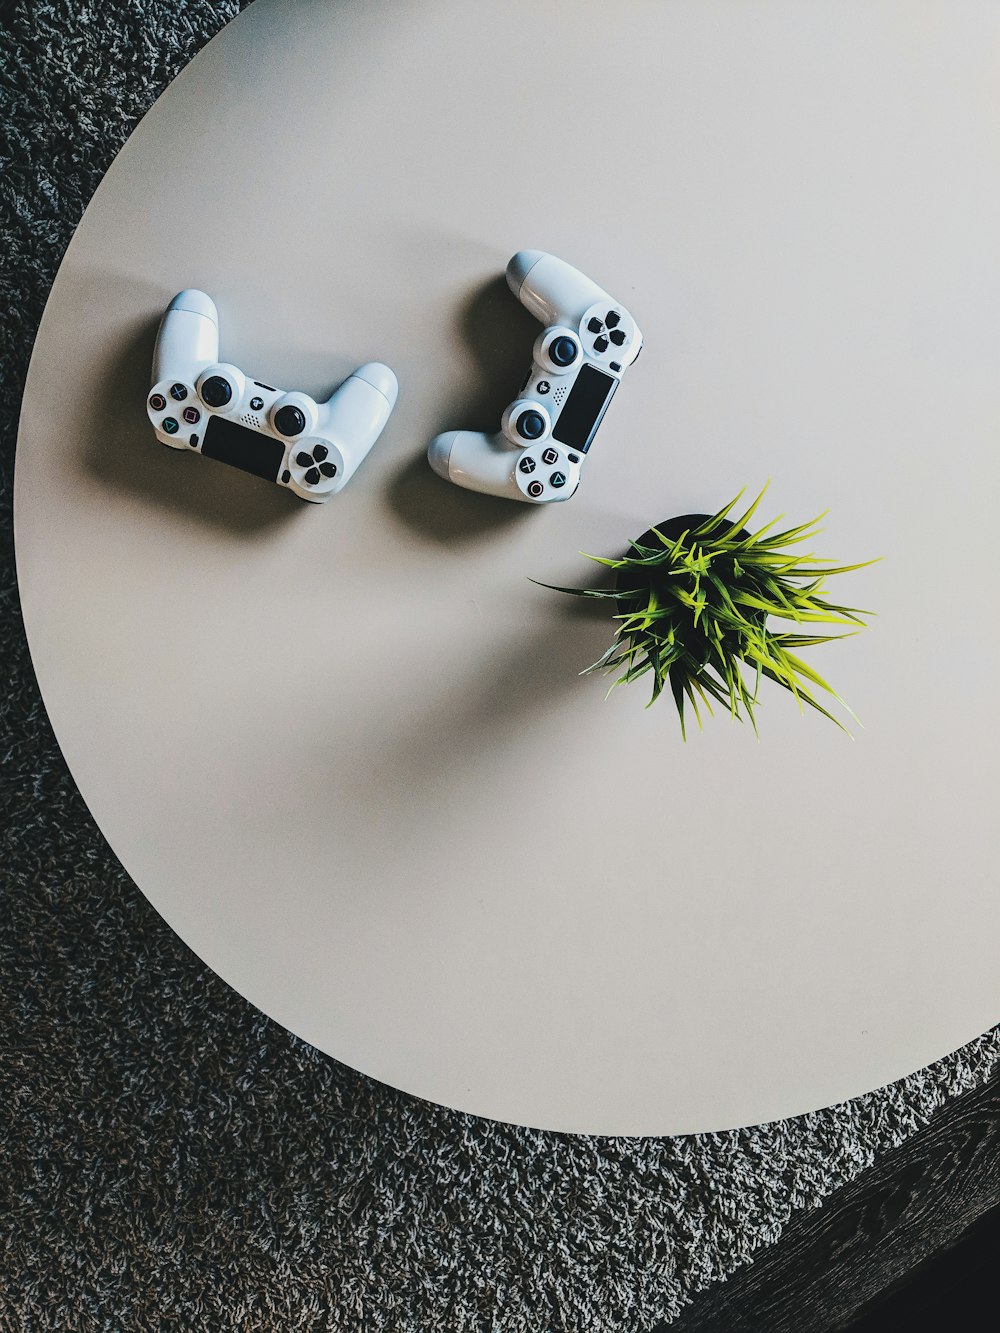 two Sony PS4 controllers on table